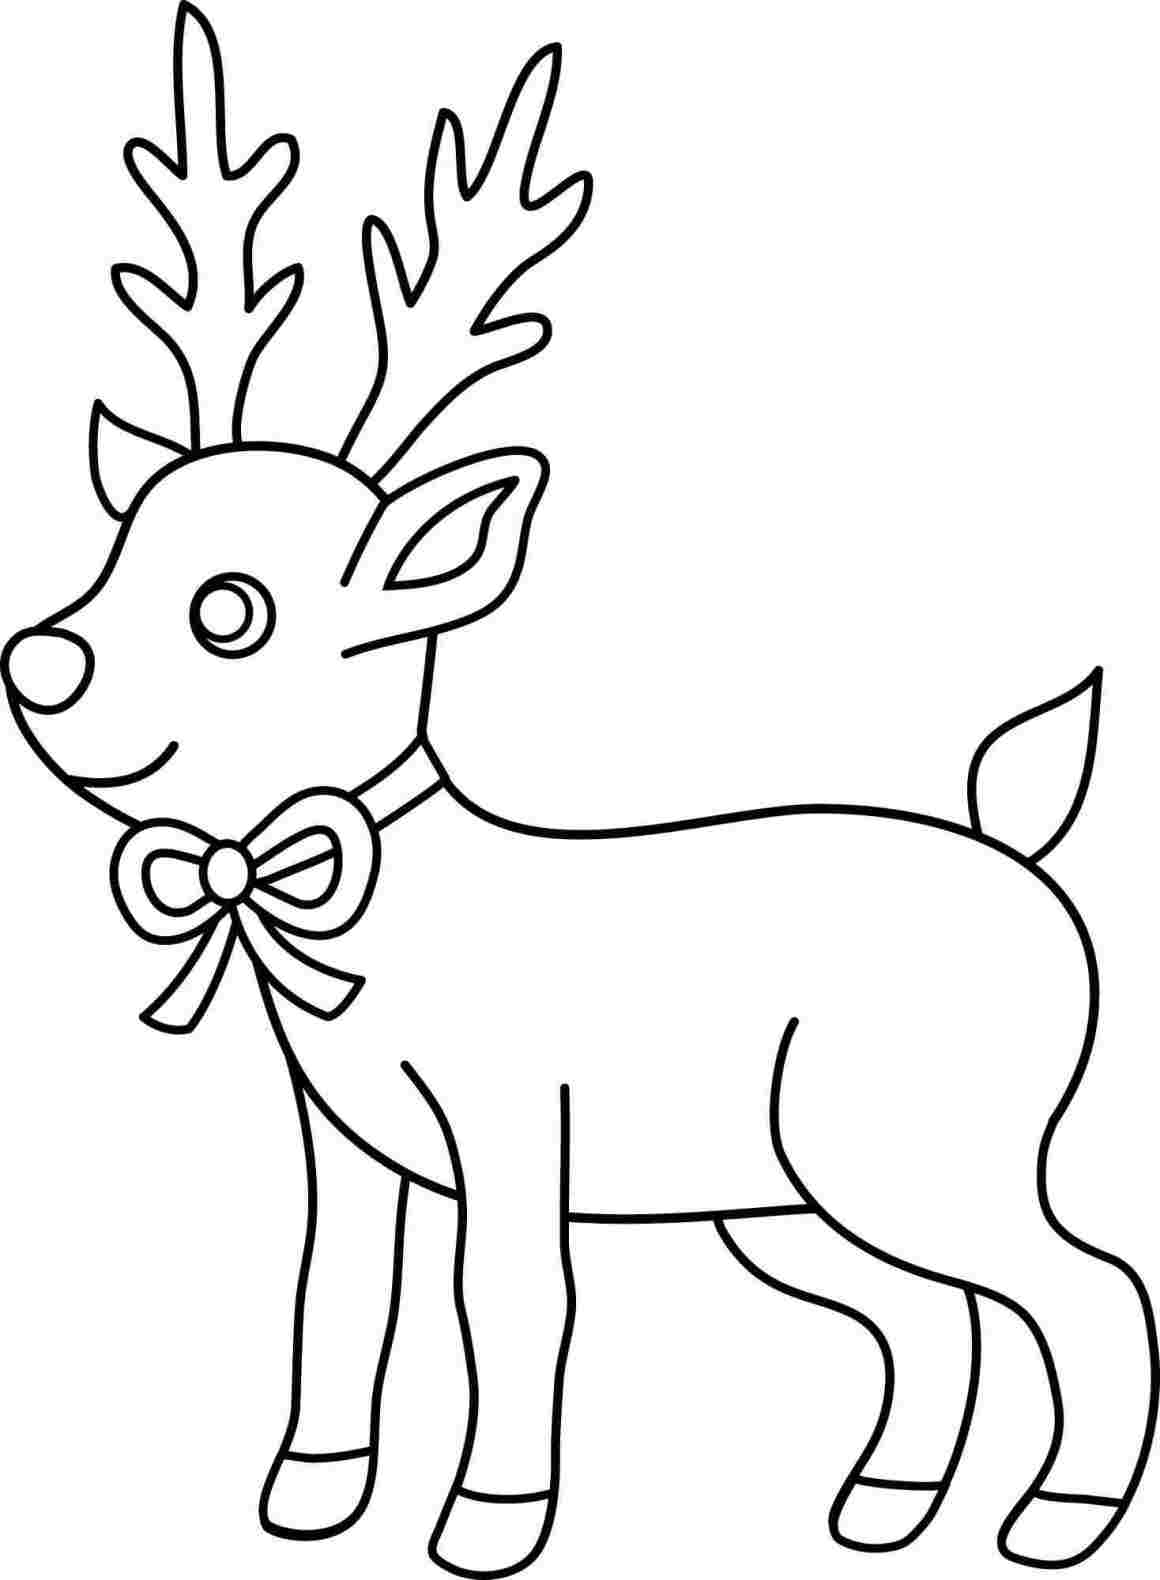 Best How To Draw A Raindeer of all time Don t miss out 